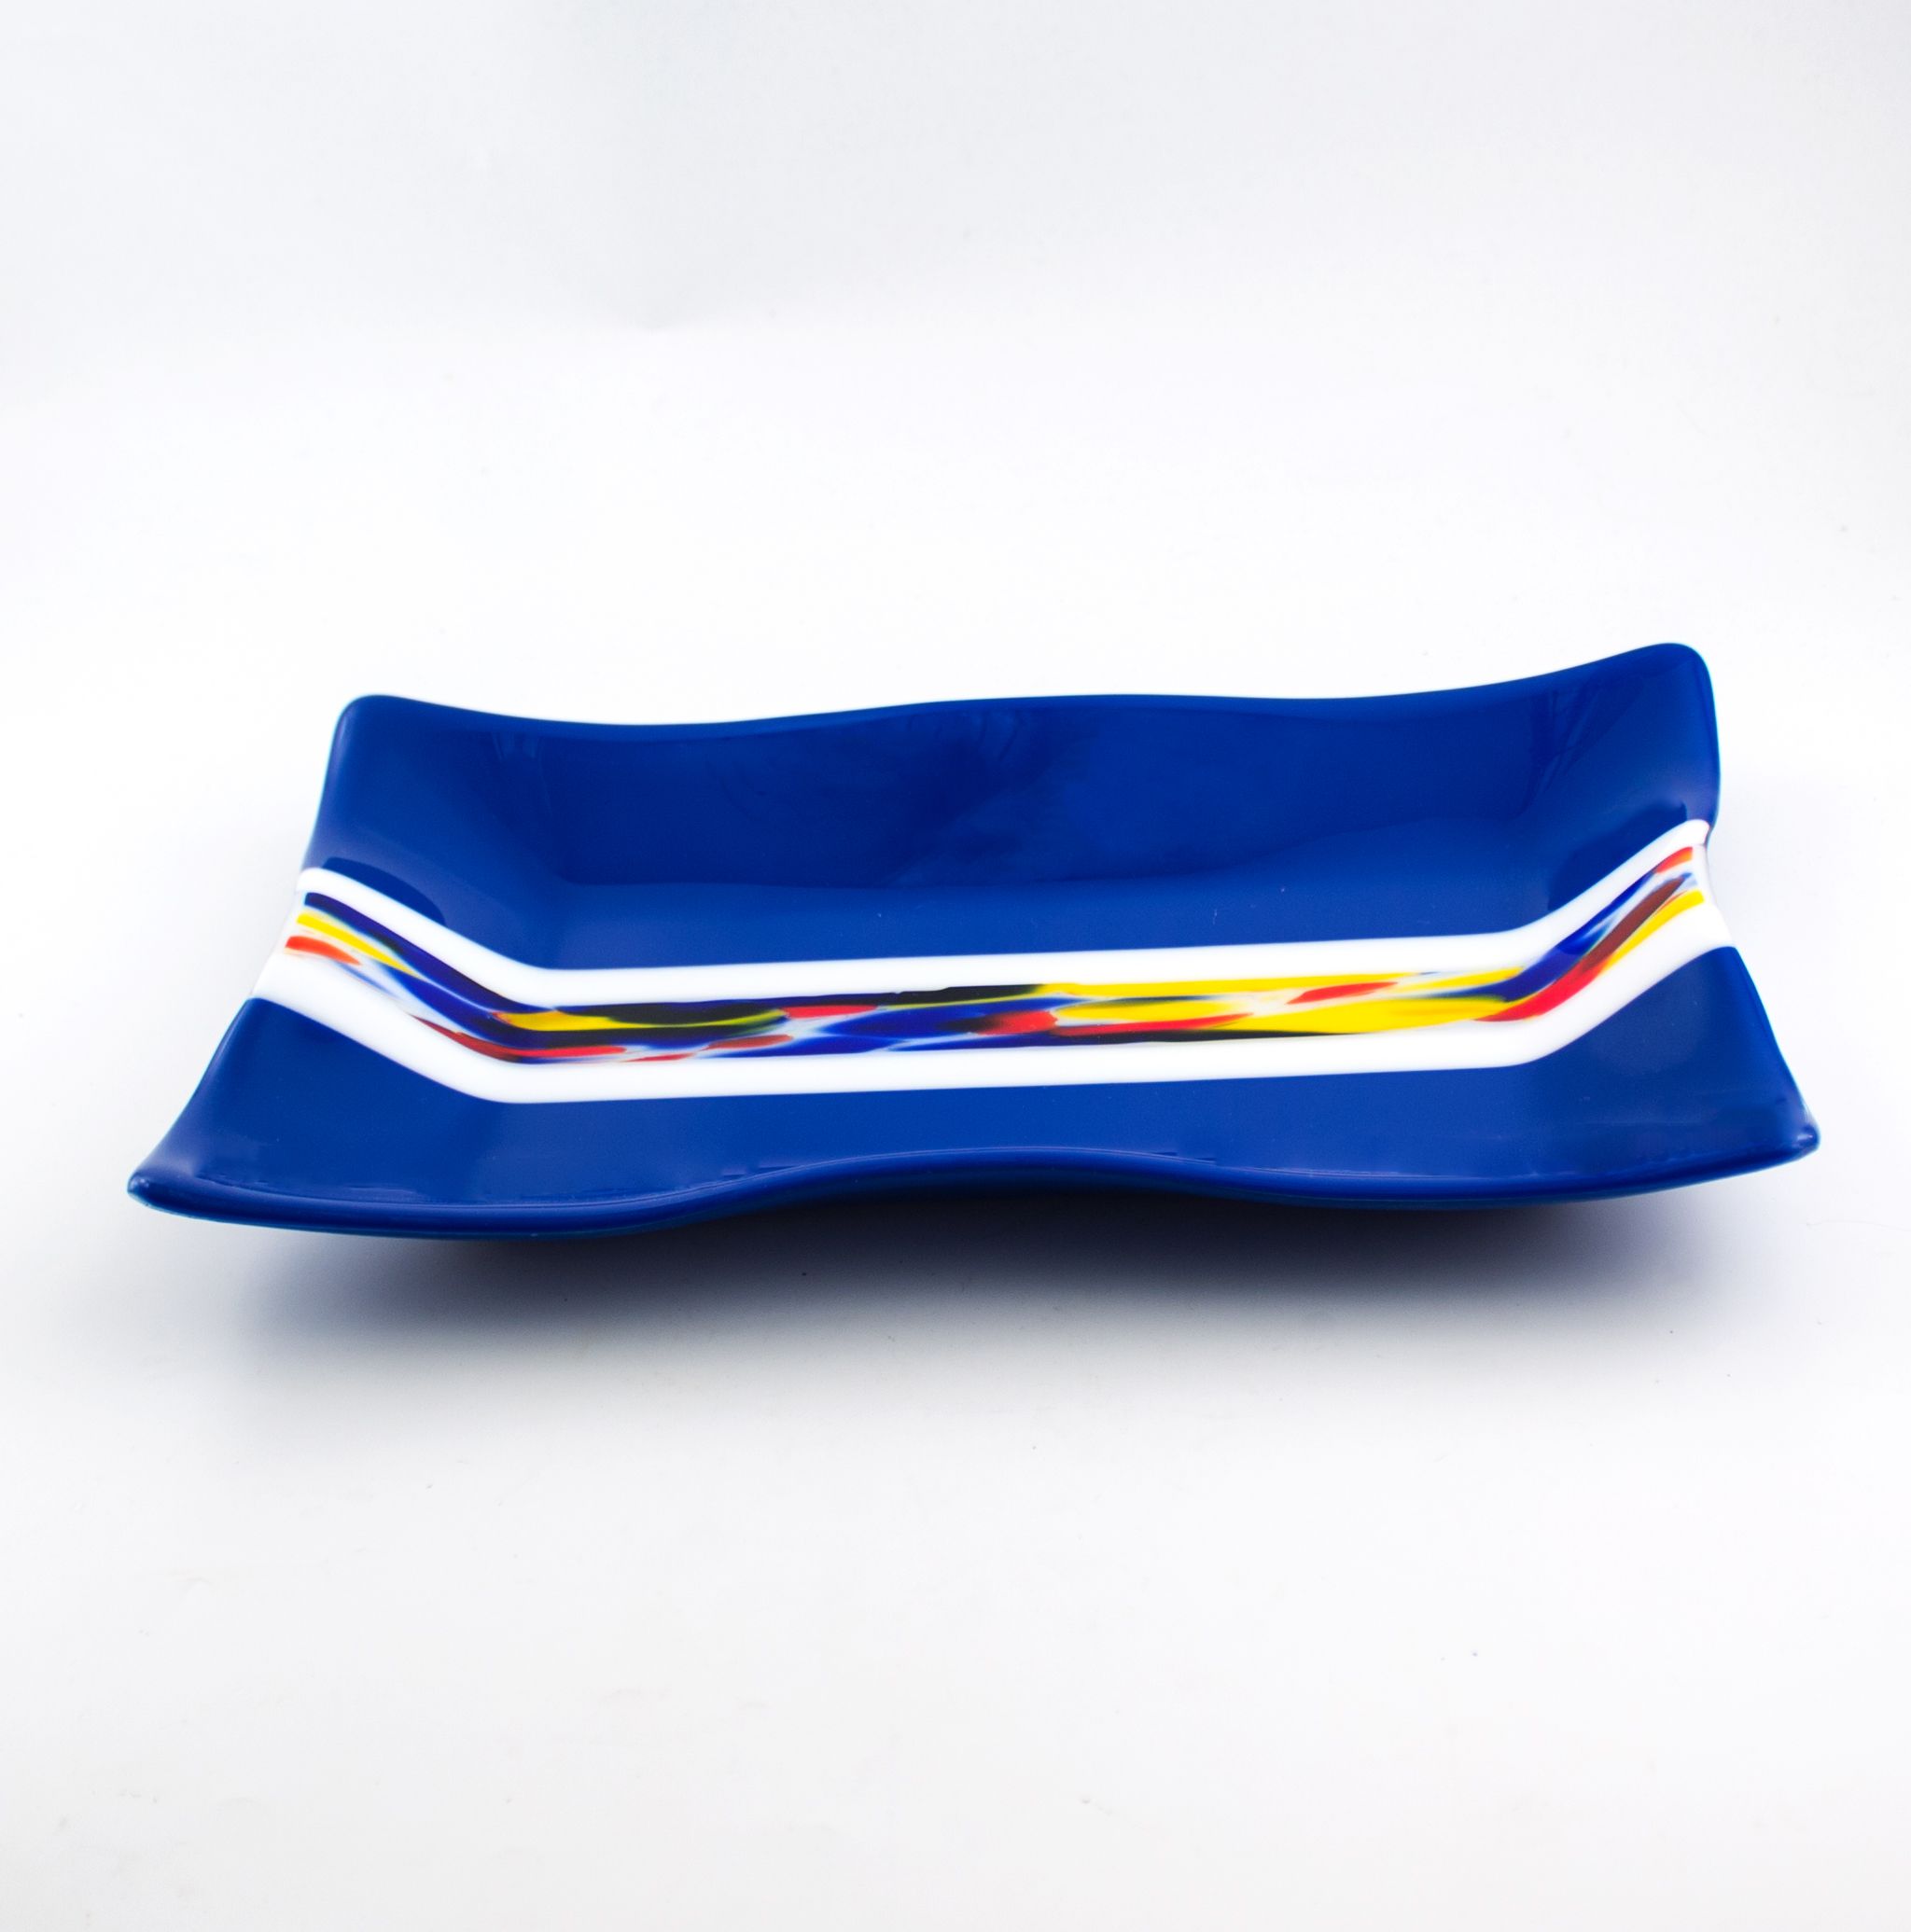 Purple Glass Cheese Plate One of a Kind Fused Glass Tray 8 Inch Tray Blue and Yellow Serving Tray Handmade Glass Serving Tray